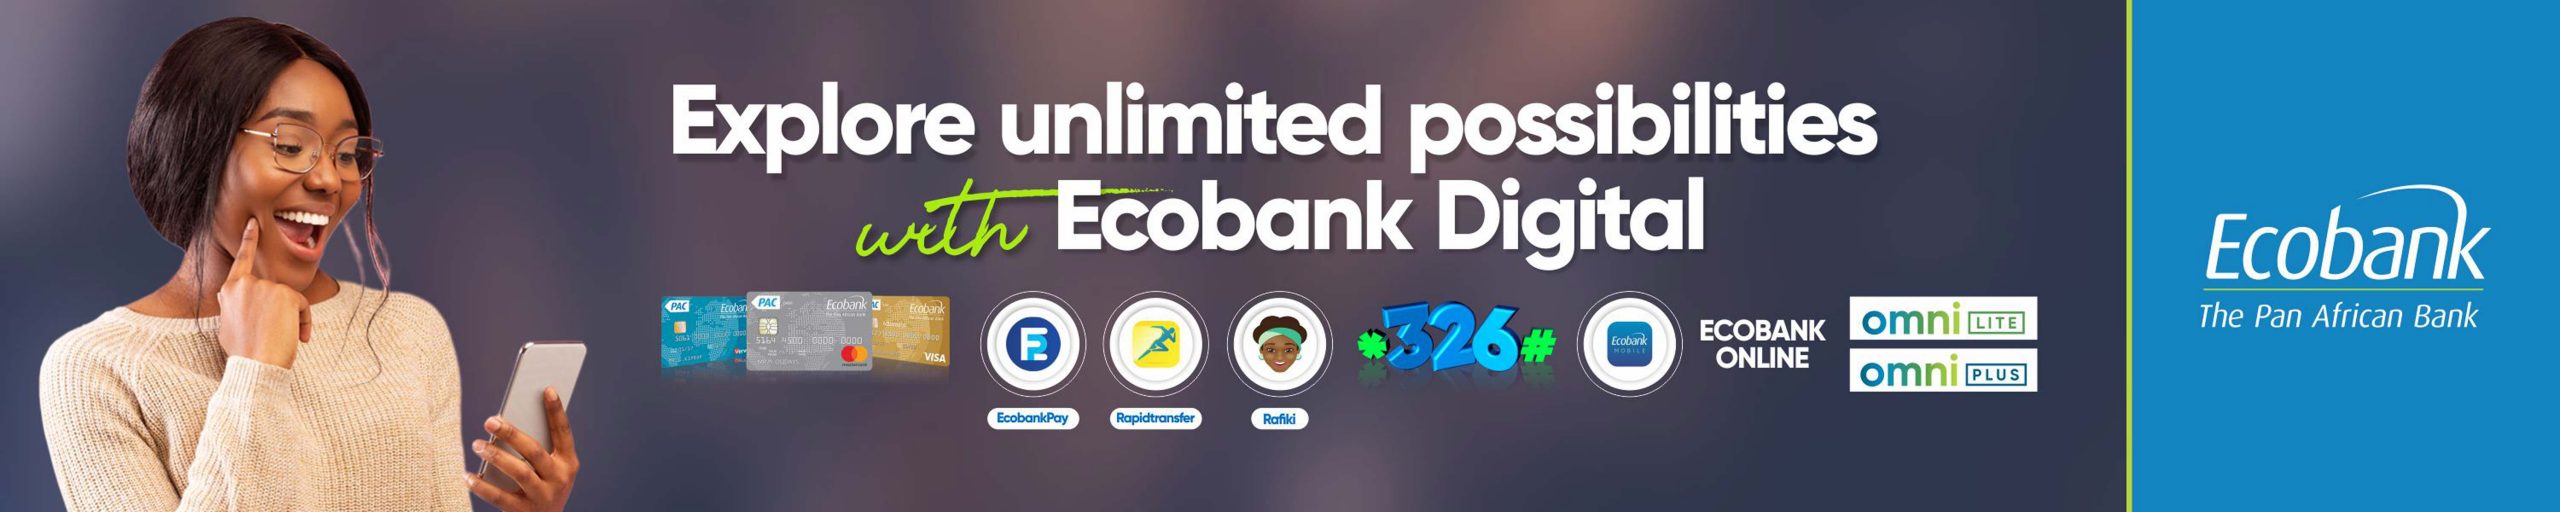 http://ecobank.com/personal-banking/ways-to-bank/mobile/mobile-banking-via-app